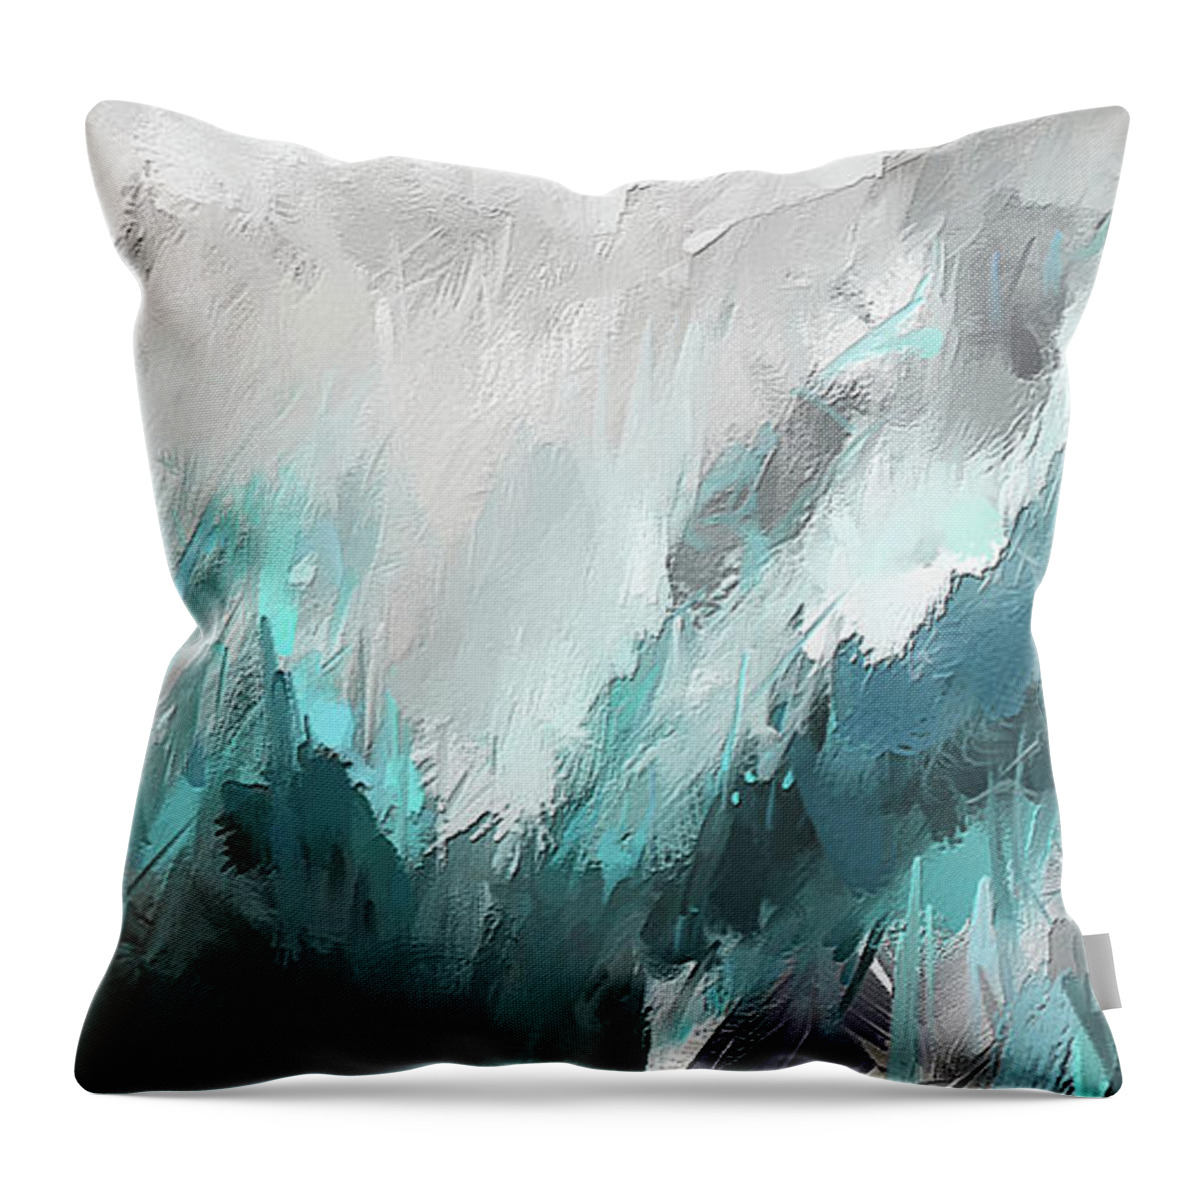 Ight Blue Throw Pillow featuring the painting Wintery Mountain- Turquoise and Gray modern Artwork by Lourry Legarde